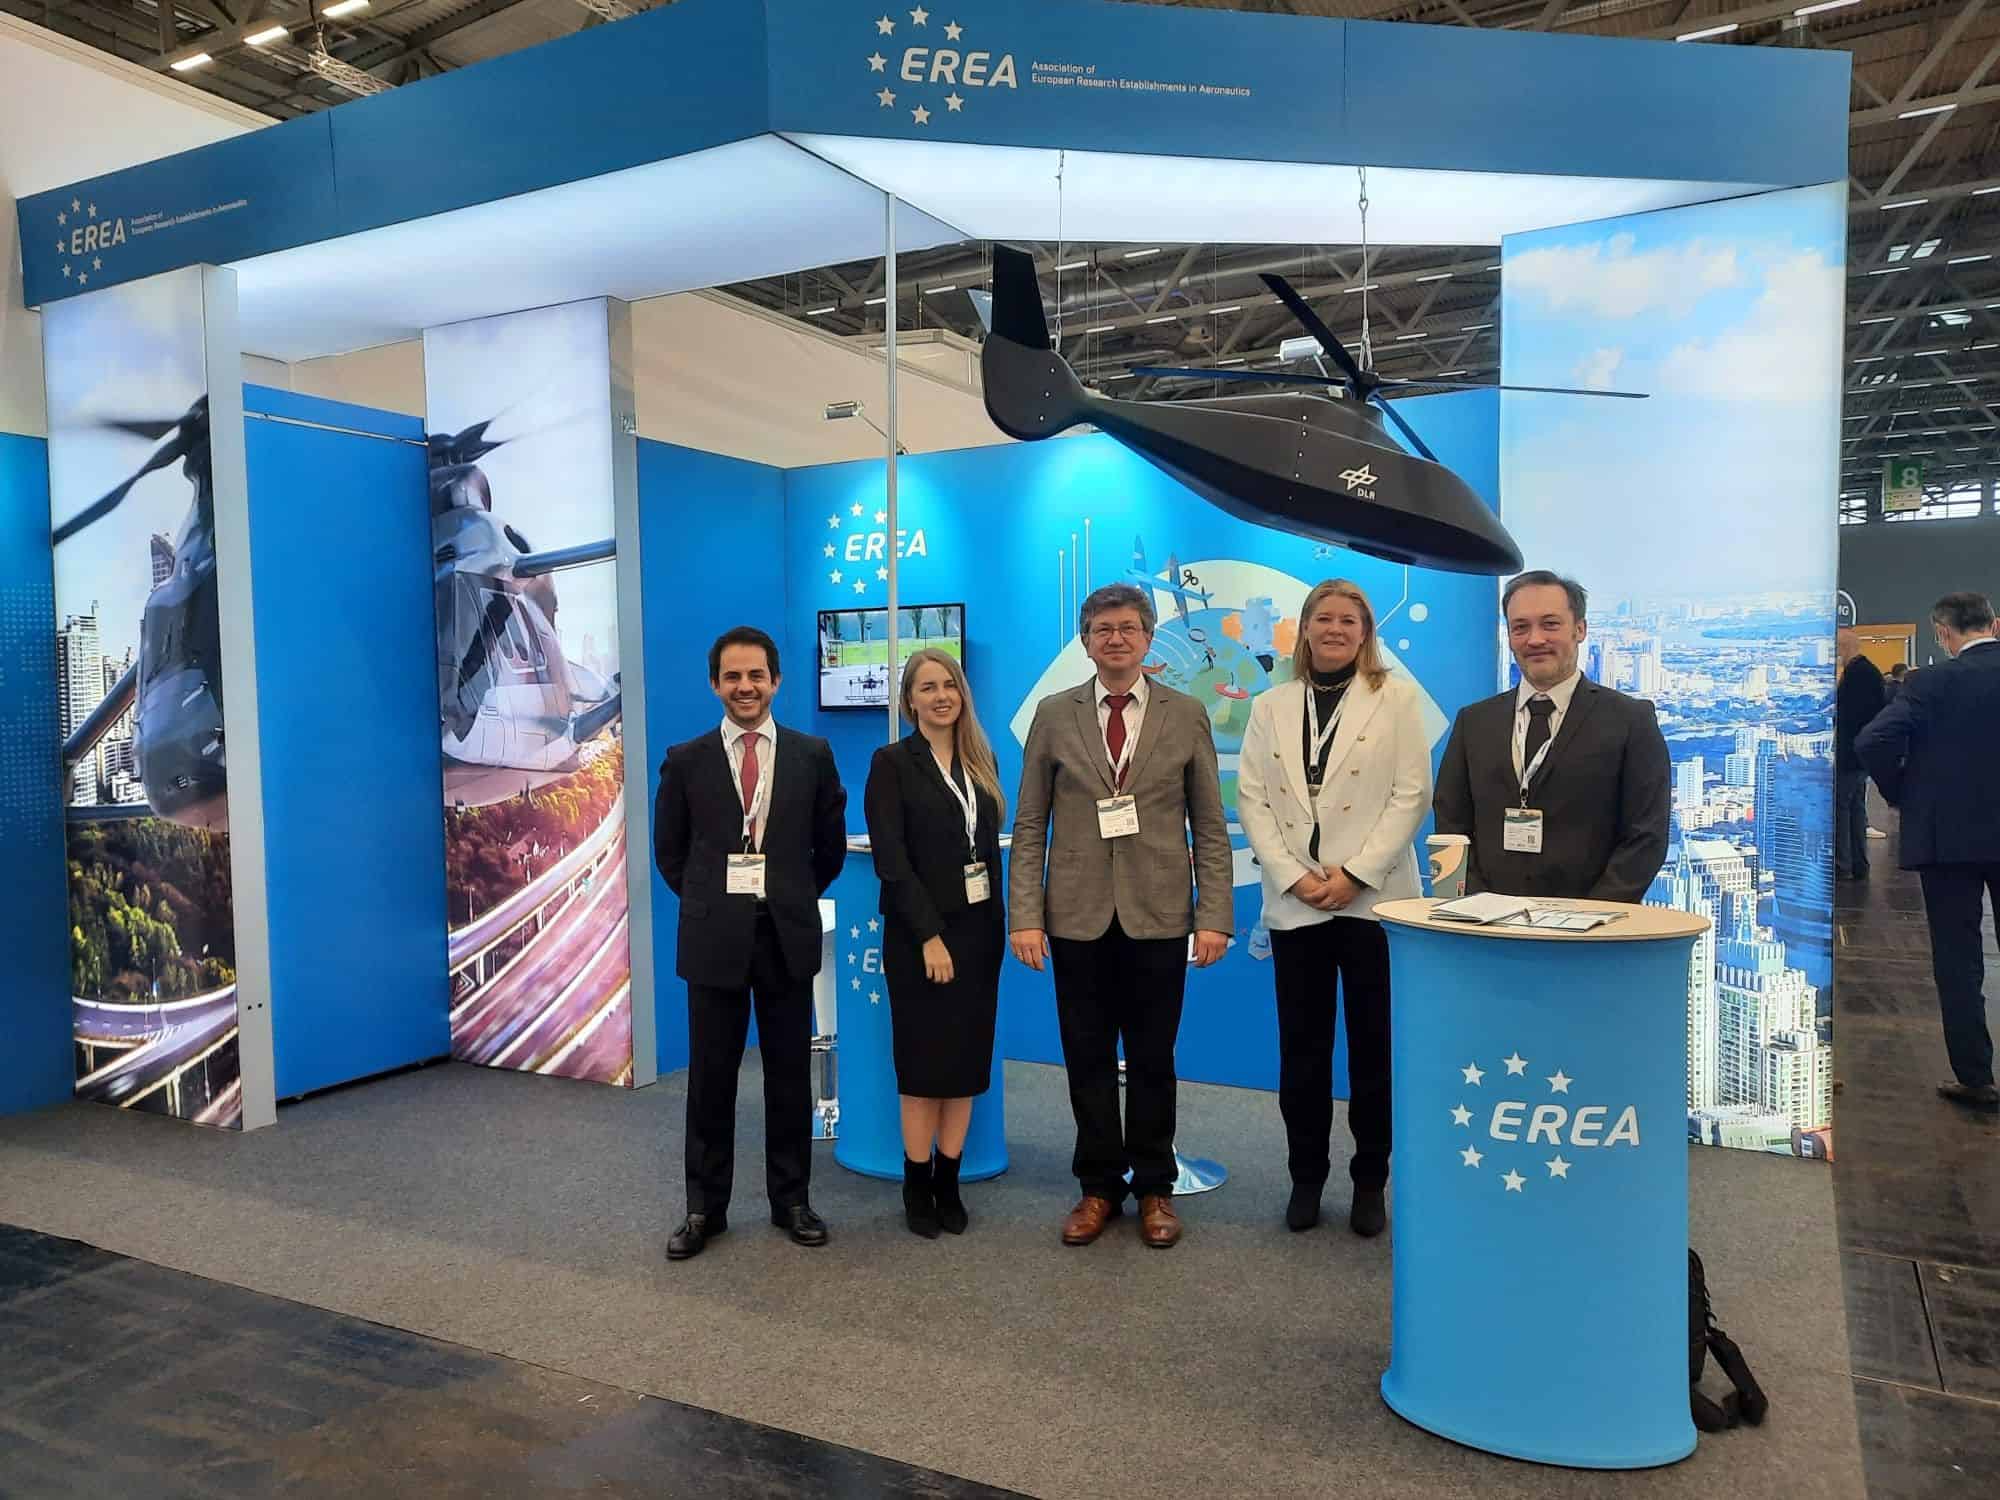 EREA’s participation in the EASA Rotorcraft Forum